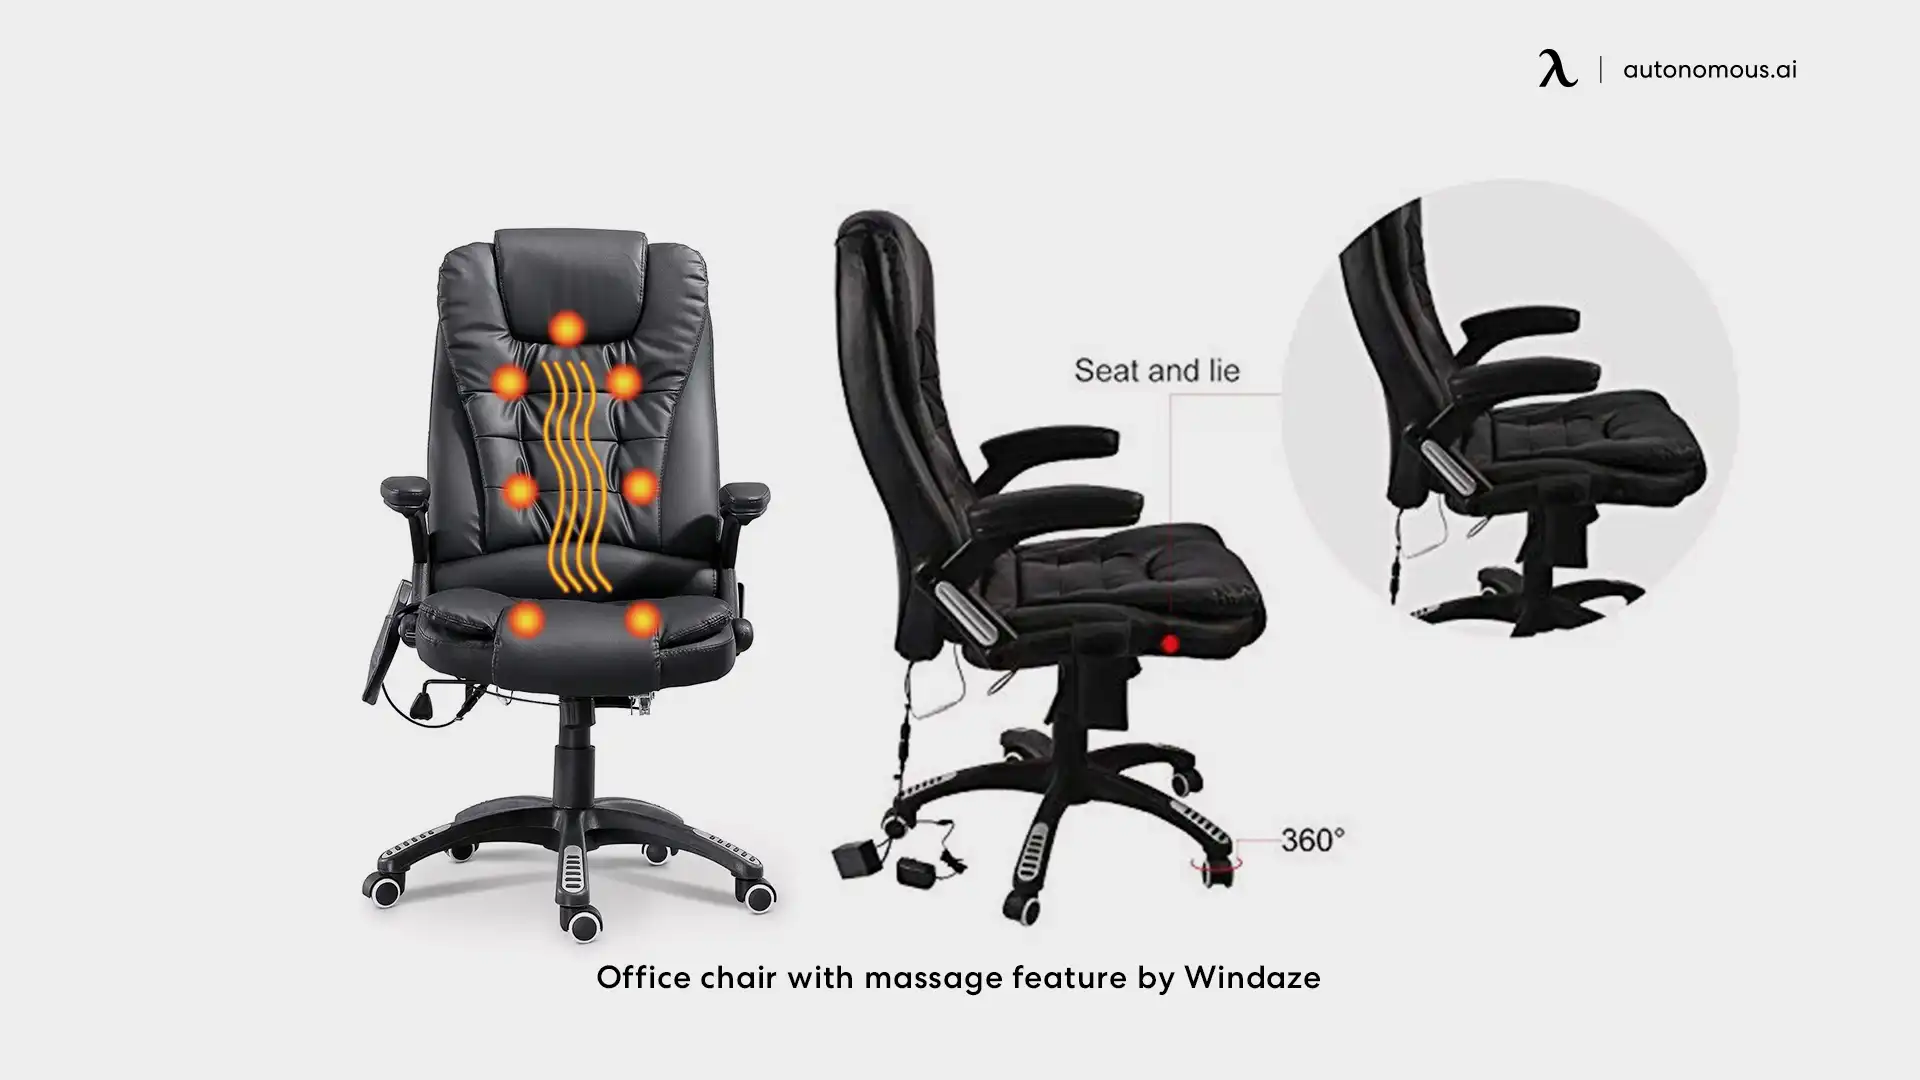 Office chair with massage feature by Windaze